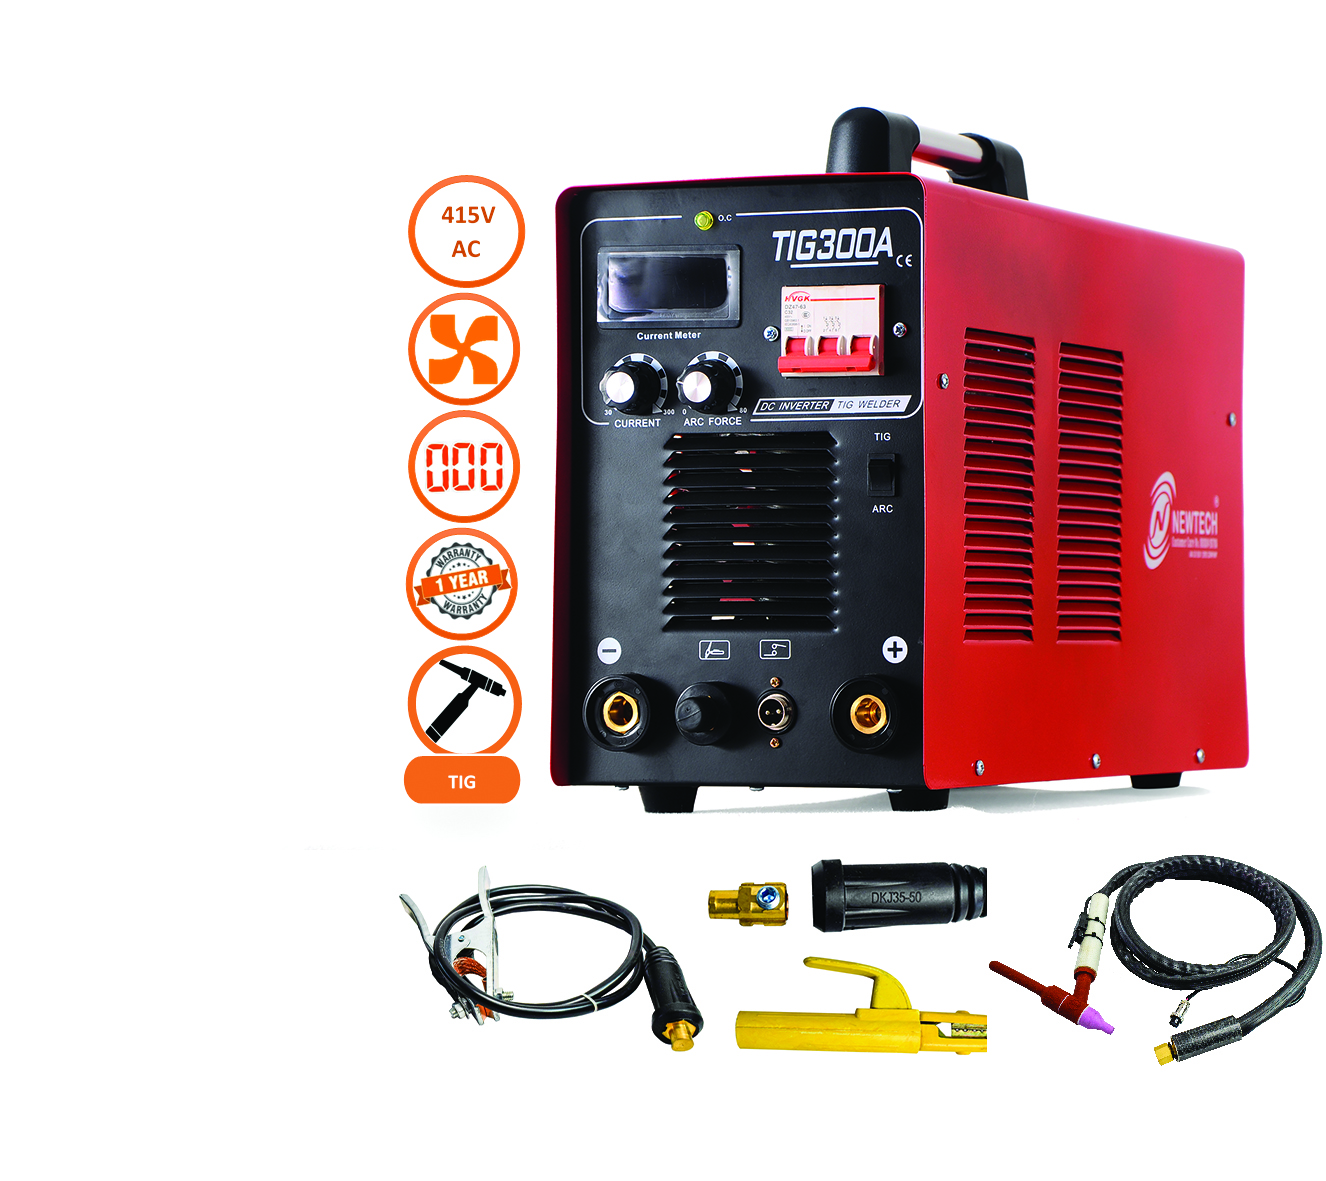 TIG 300 Welding Machine by Newtech Technology in Surat - India